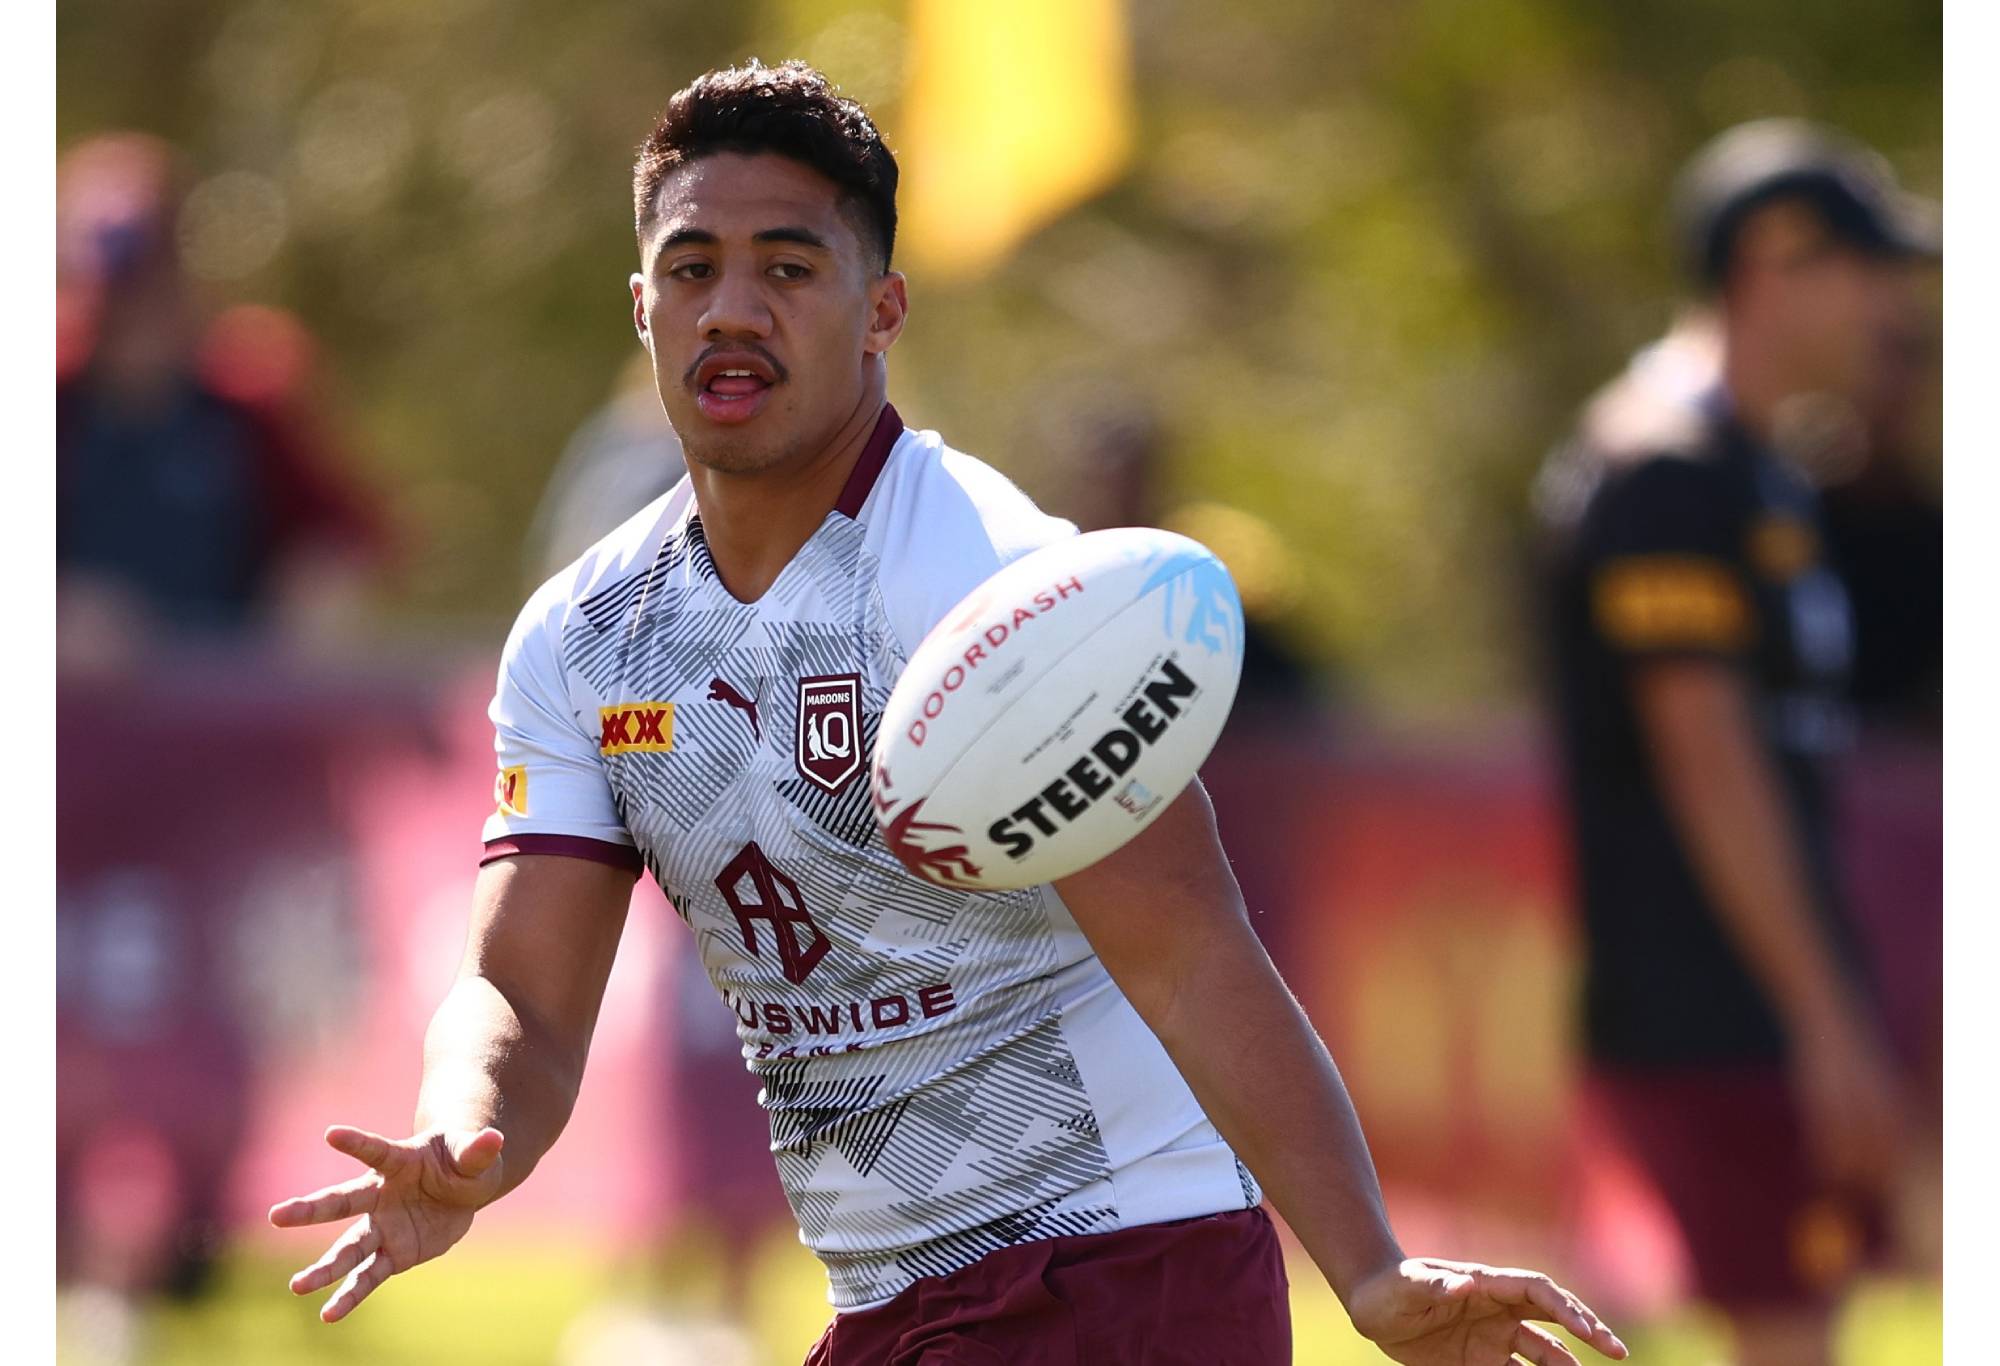 GOLD COAST, AUSTRALIA - JUNE 04: Murray Taulagi during a Queensland Maroons State of Origin training session at Sanctuary Cove on June 04, 2022 in Gold Coast, Australia. (Photo by Chris Hyde/Getty Images)